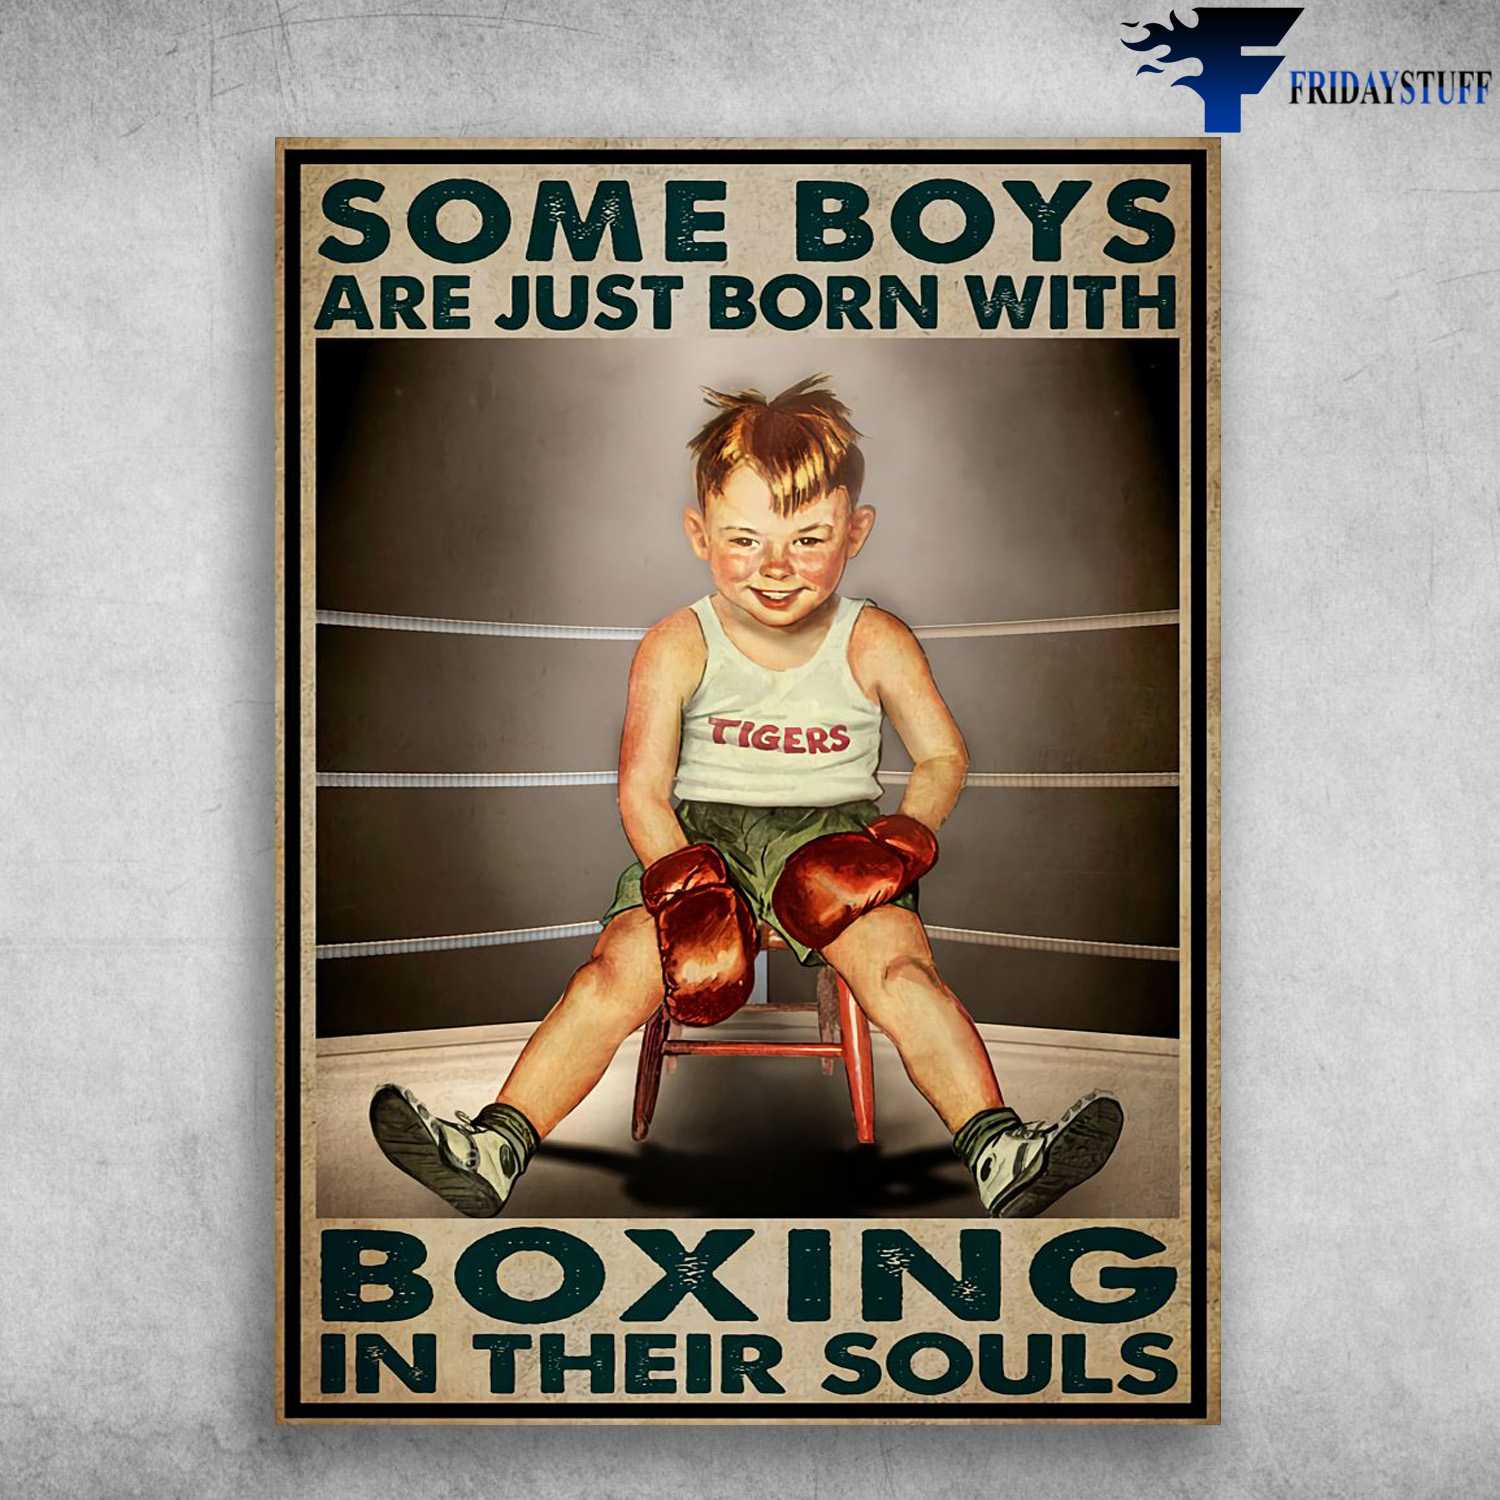 Boxing Boy - Some Boys Are Just Born With, Boxing In Their Souls